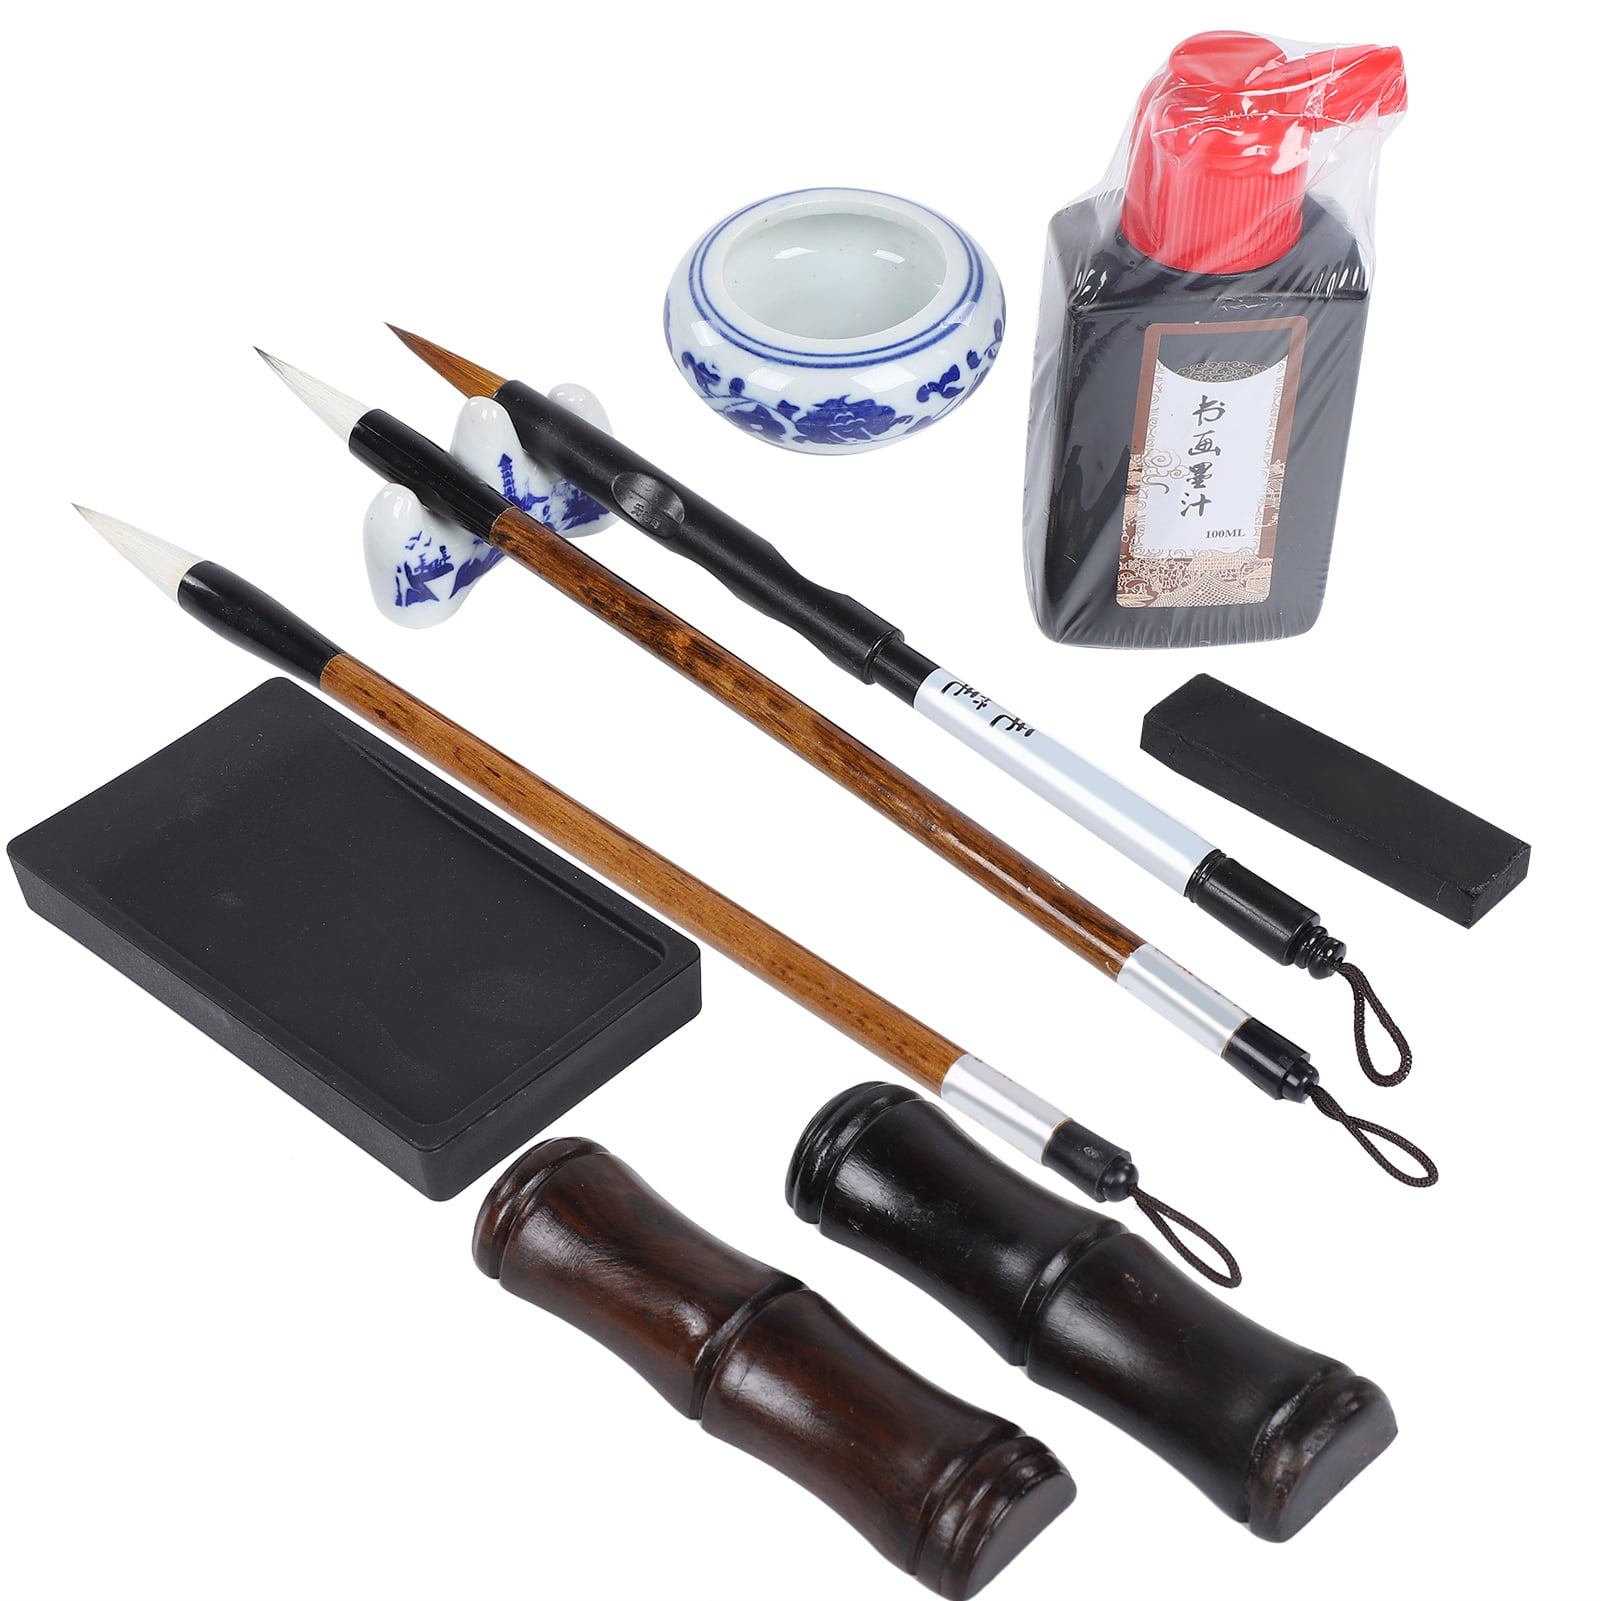 PandaHall Elite 12Pcs 5 Style Practice Calligraphy Kits, with Chinese  Calligraphy Brushes Pen, Spoon Shape Ink Tray Containers and Reusable Water